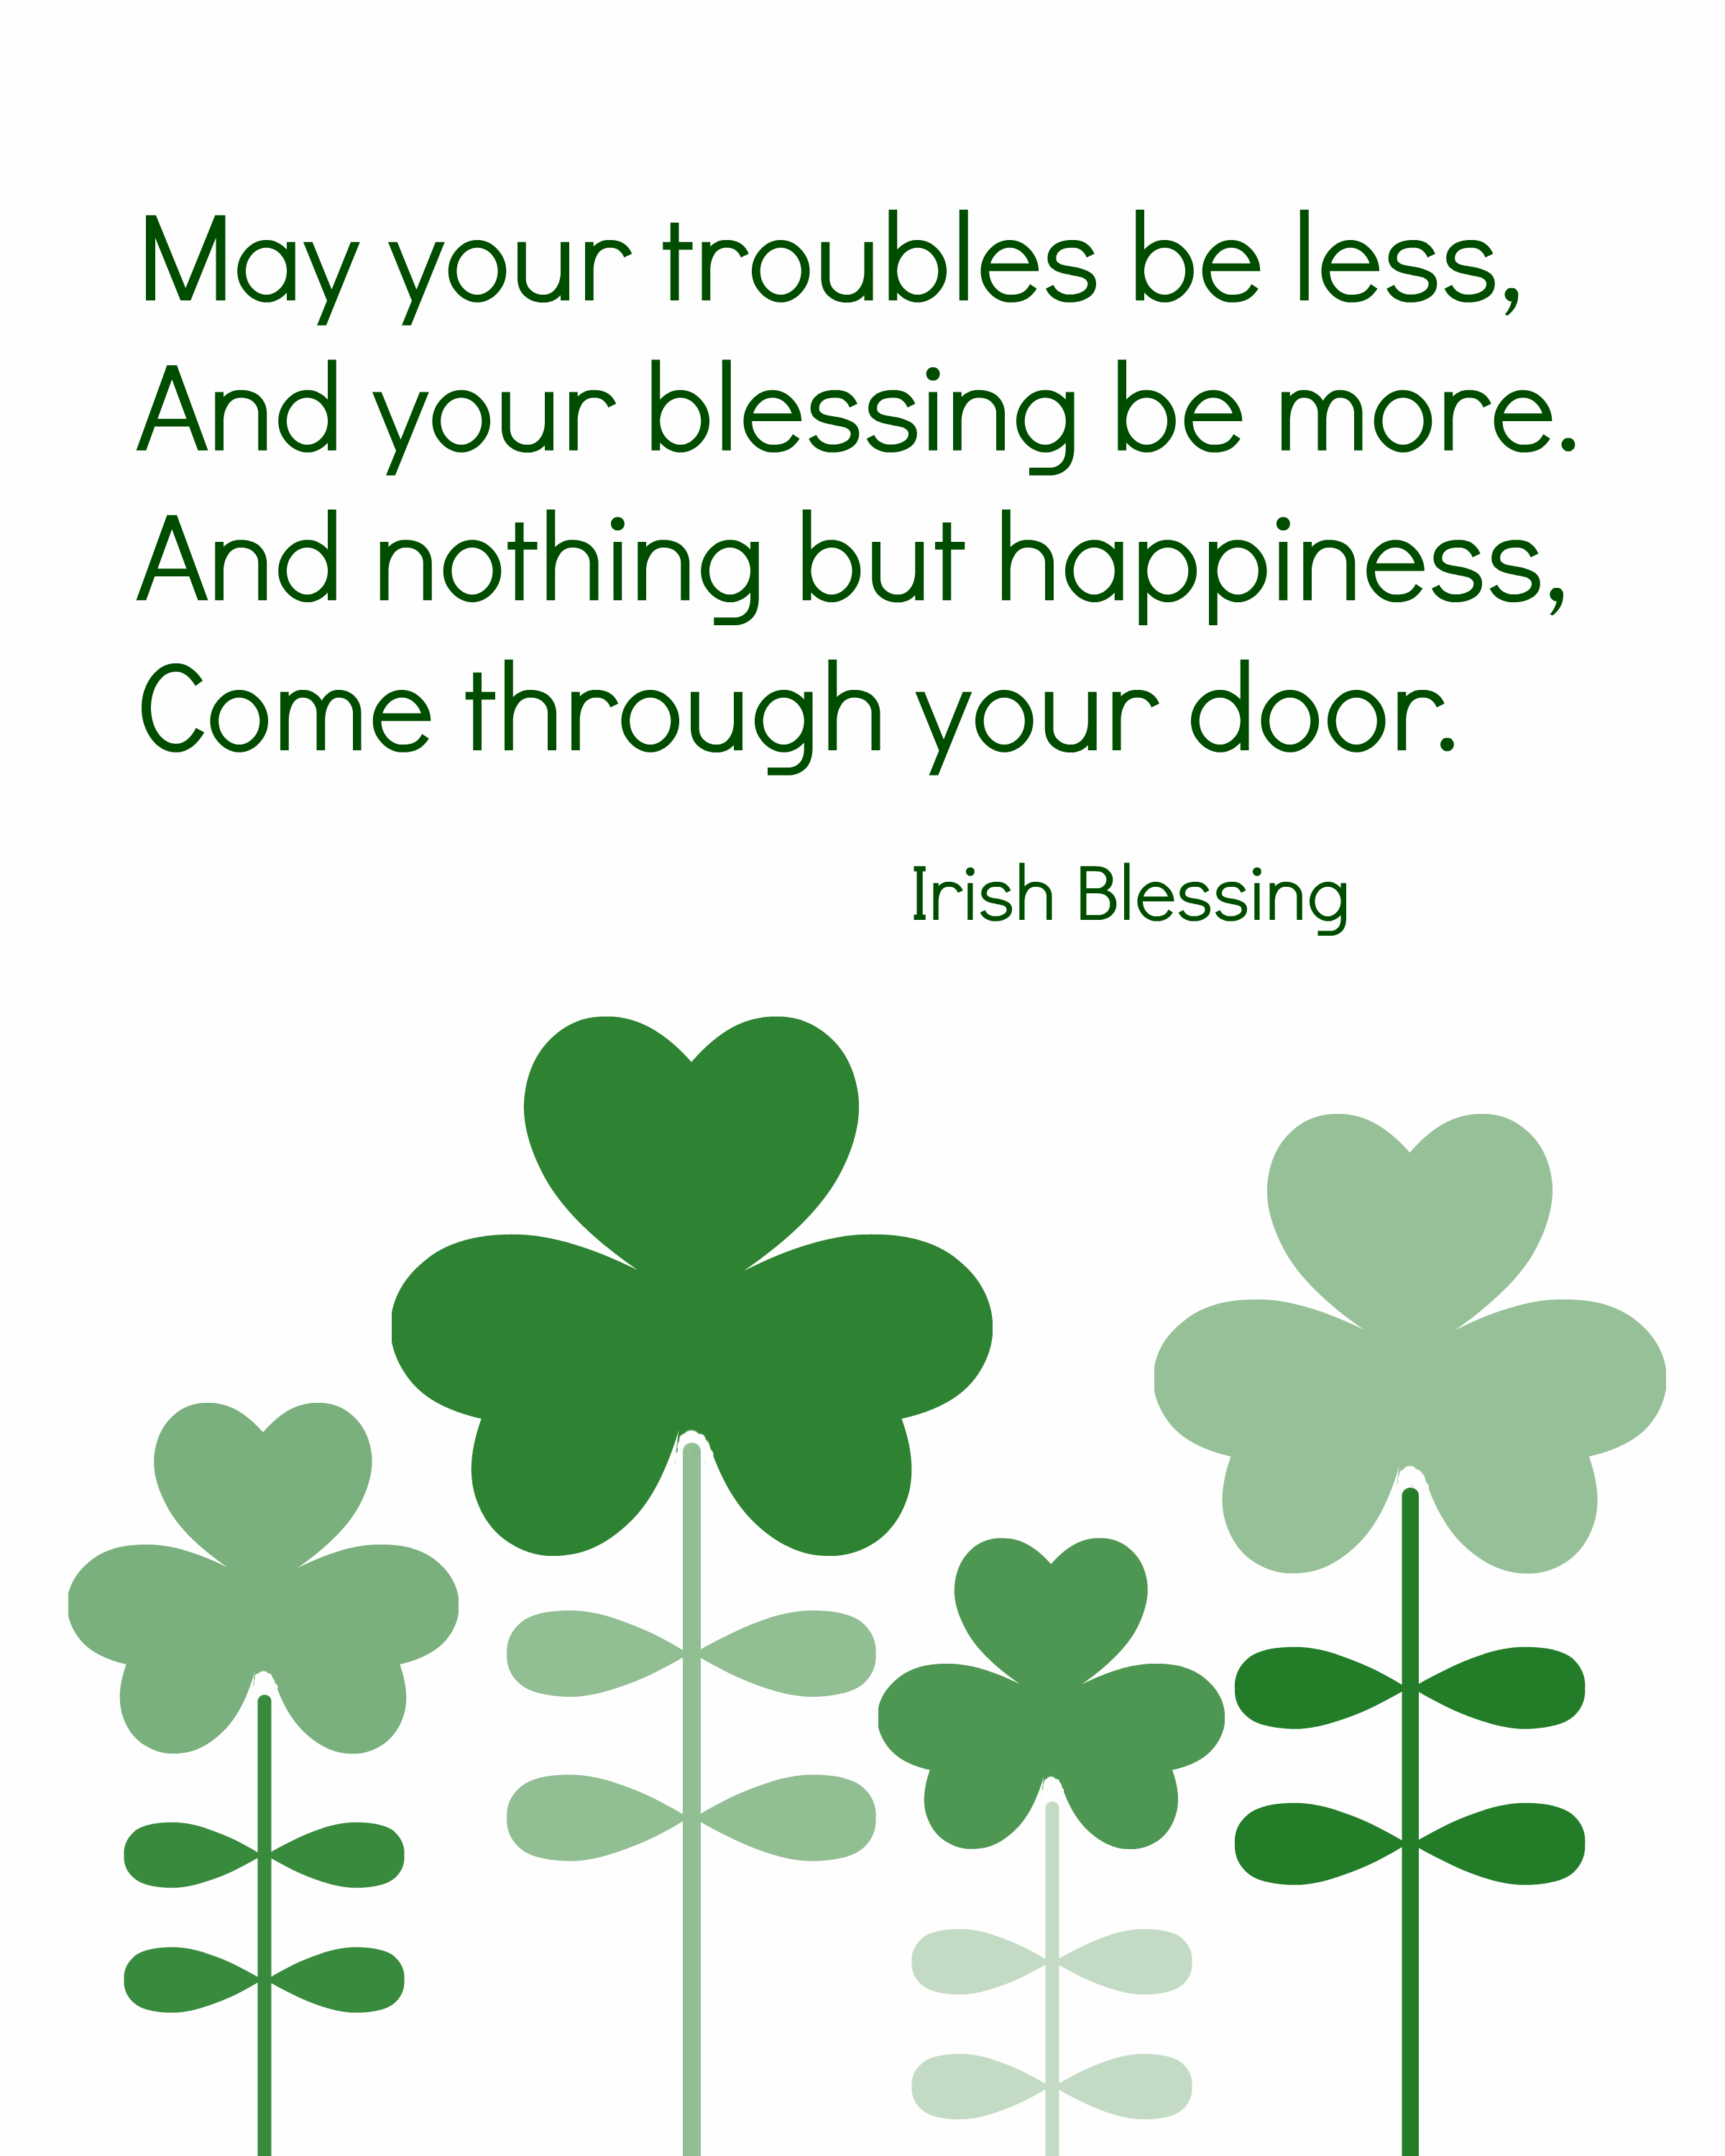 st-patrick-s-day-quote-project-inspire-d-212-an-extraordinary-day